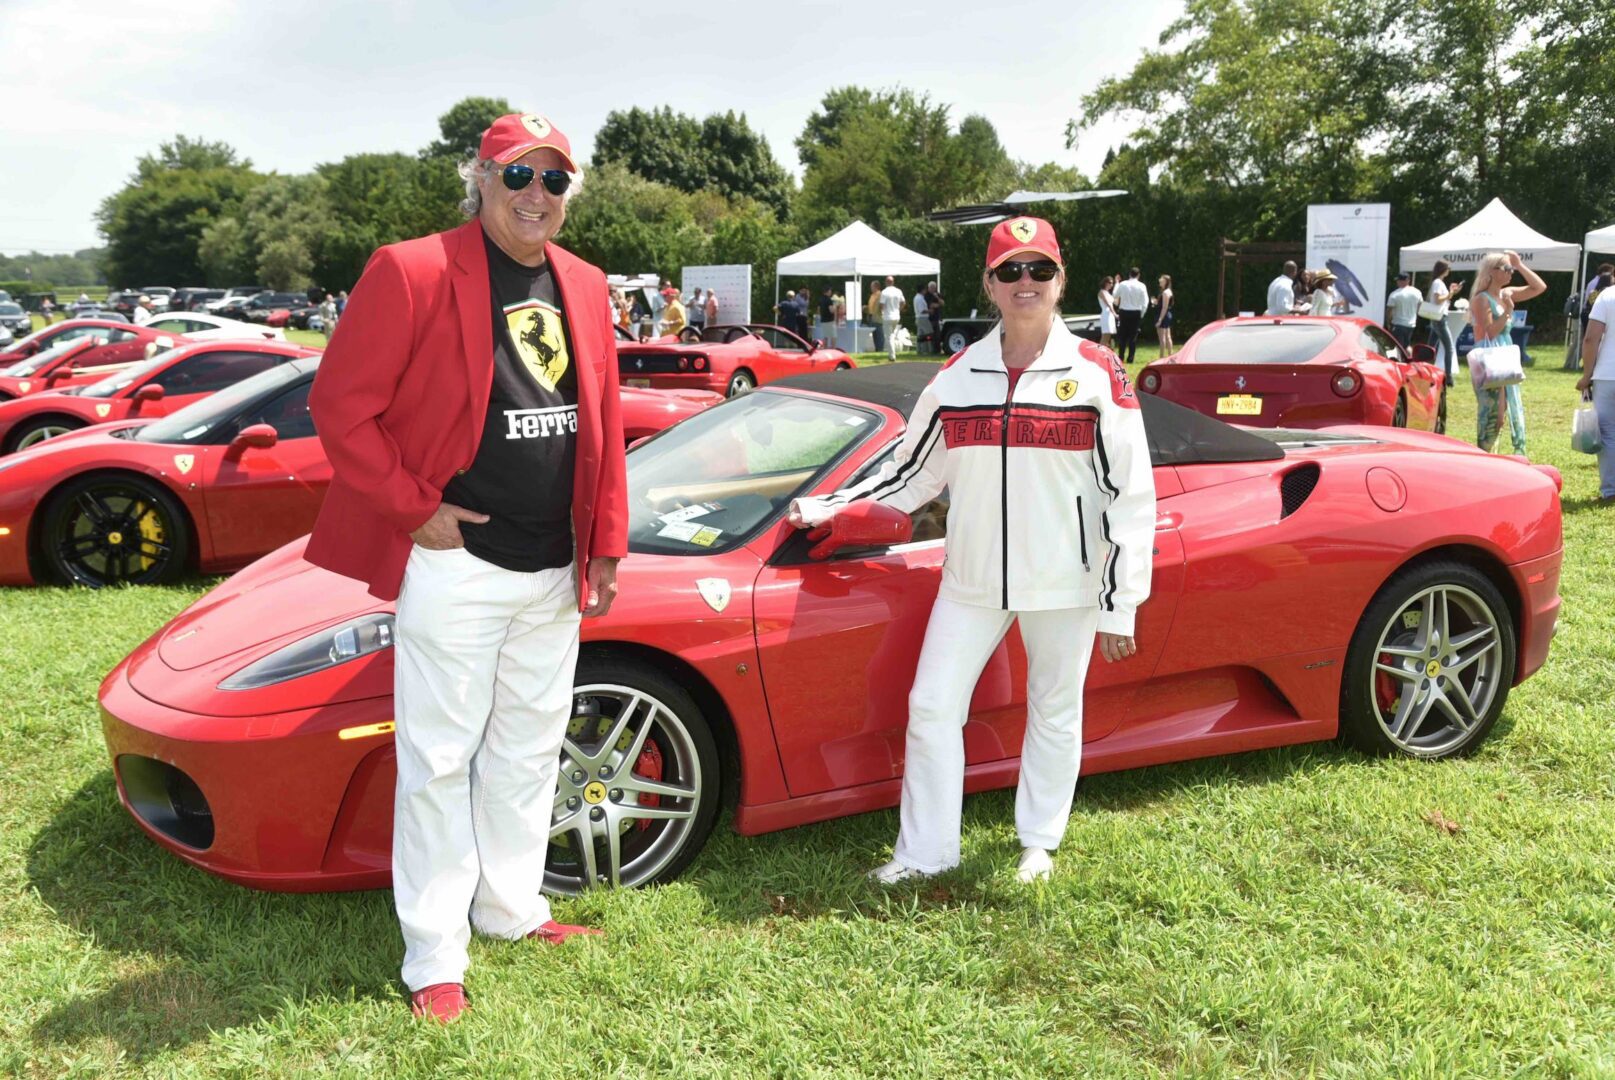 Two people standing next to a red ferrari sports car.